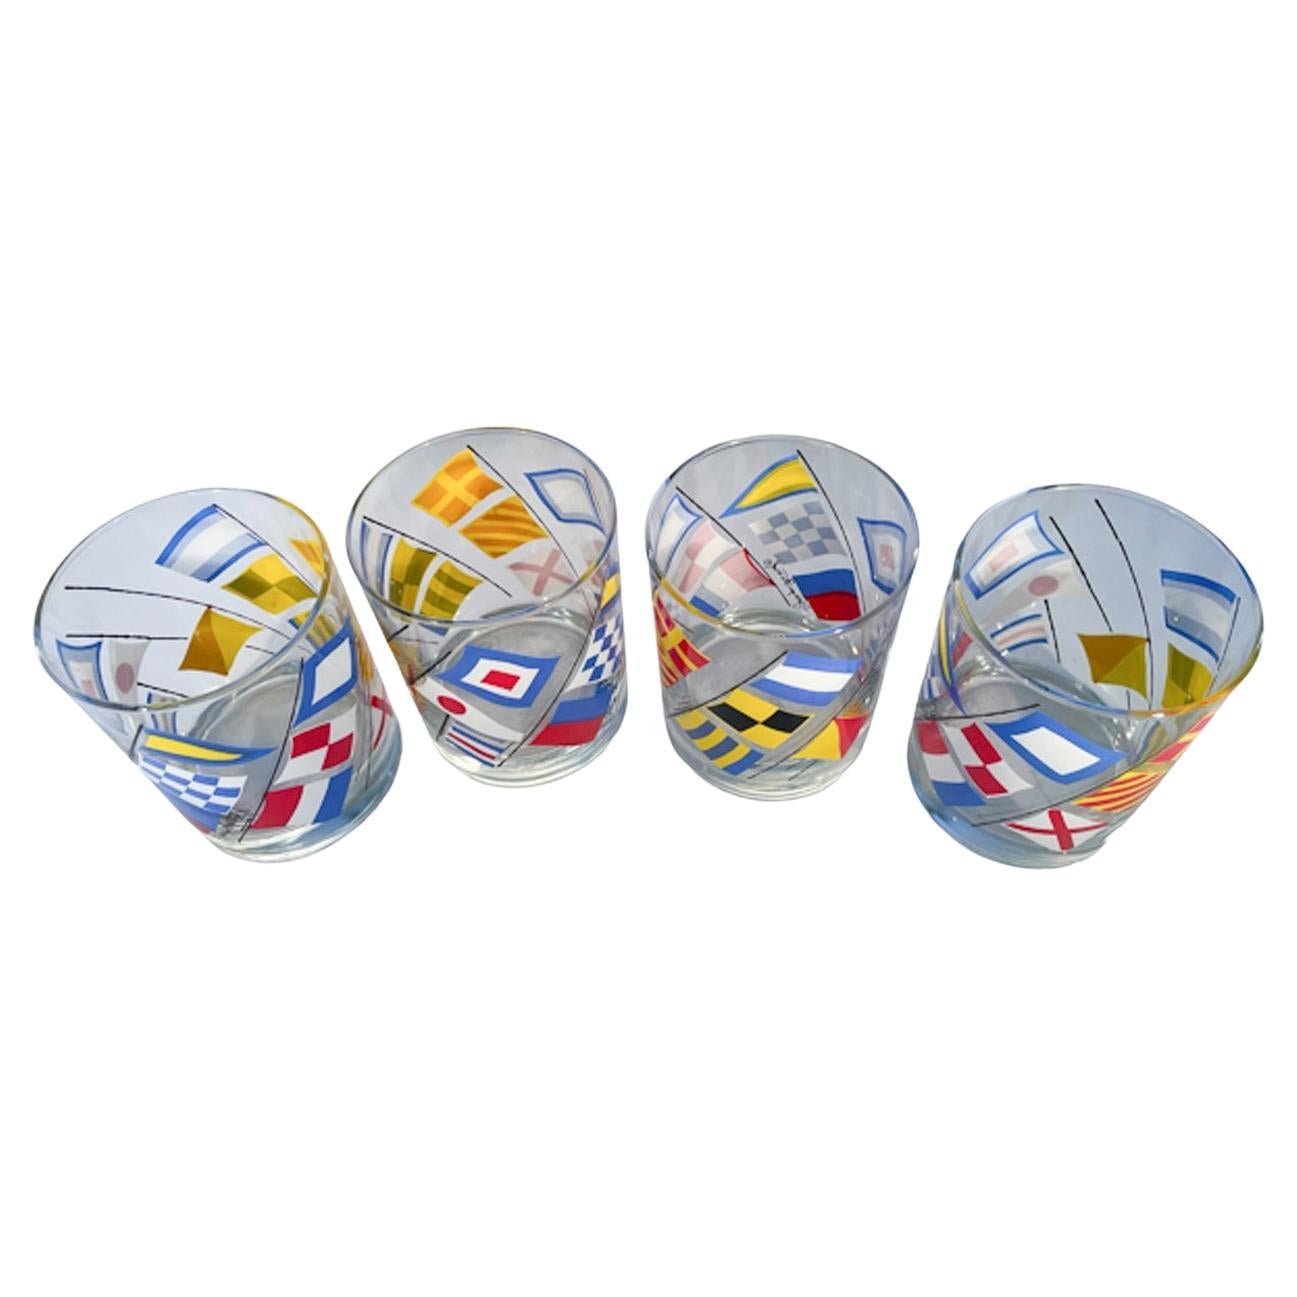 Four large rocks glasses designed and signed by Georges Briard in clear glass decorated with nautical signal flags in brightly colored enamels.